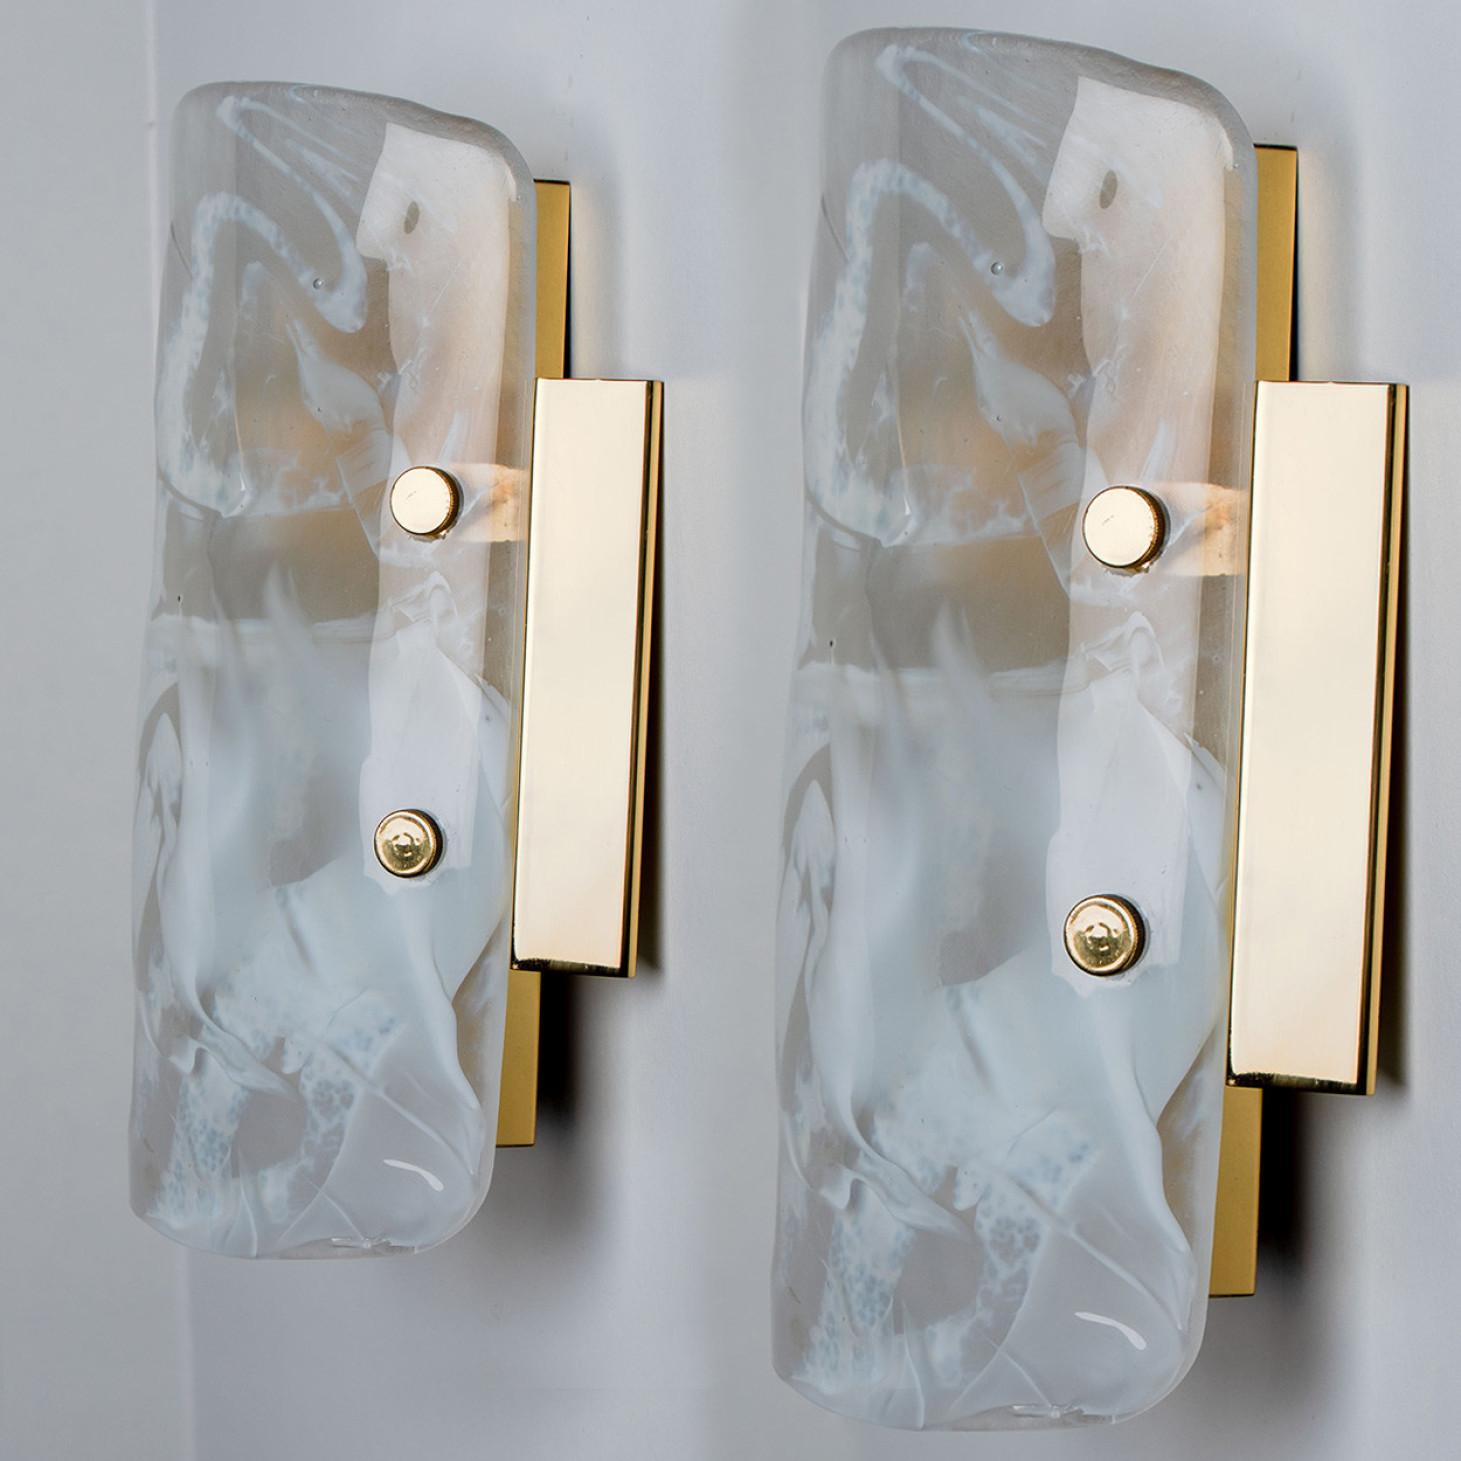 Adam Style Hillebrand Marble Murano Glass Wall Light Fixtures, 1960s For Sale